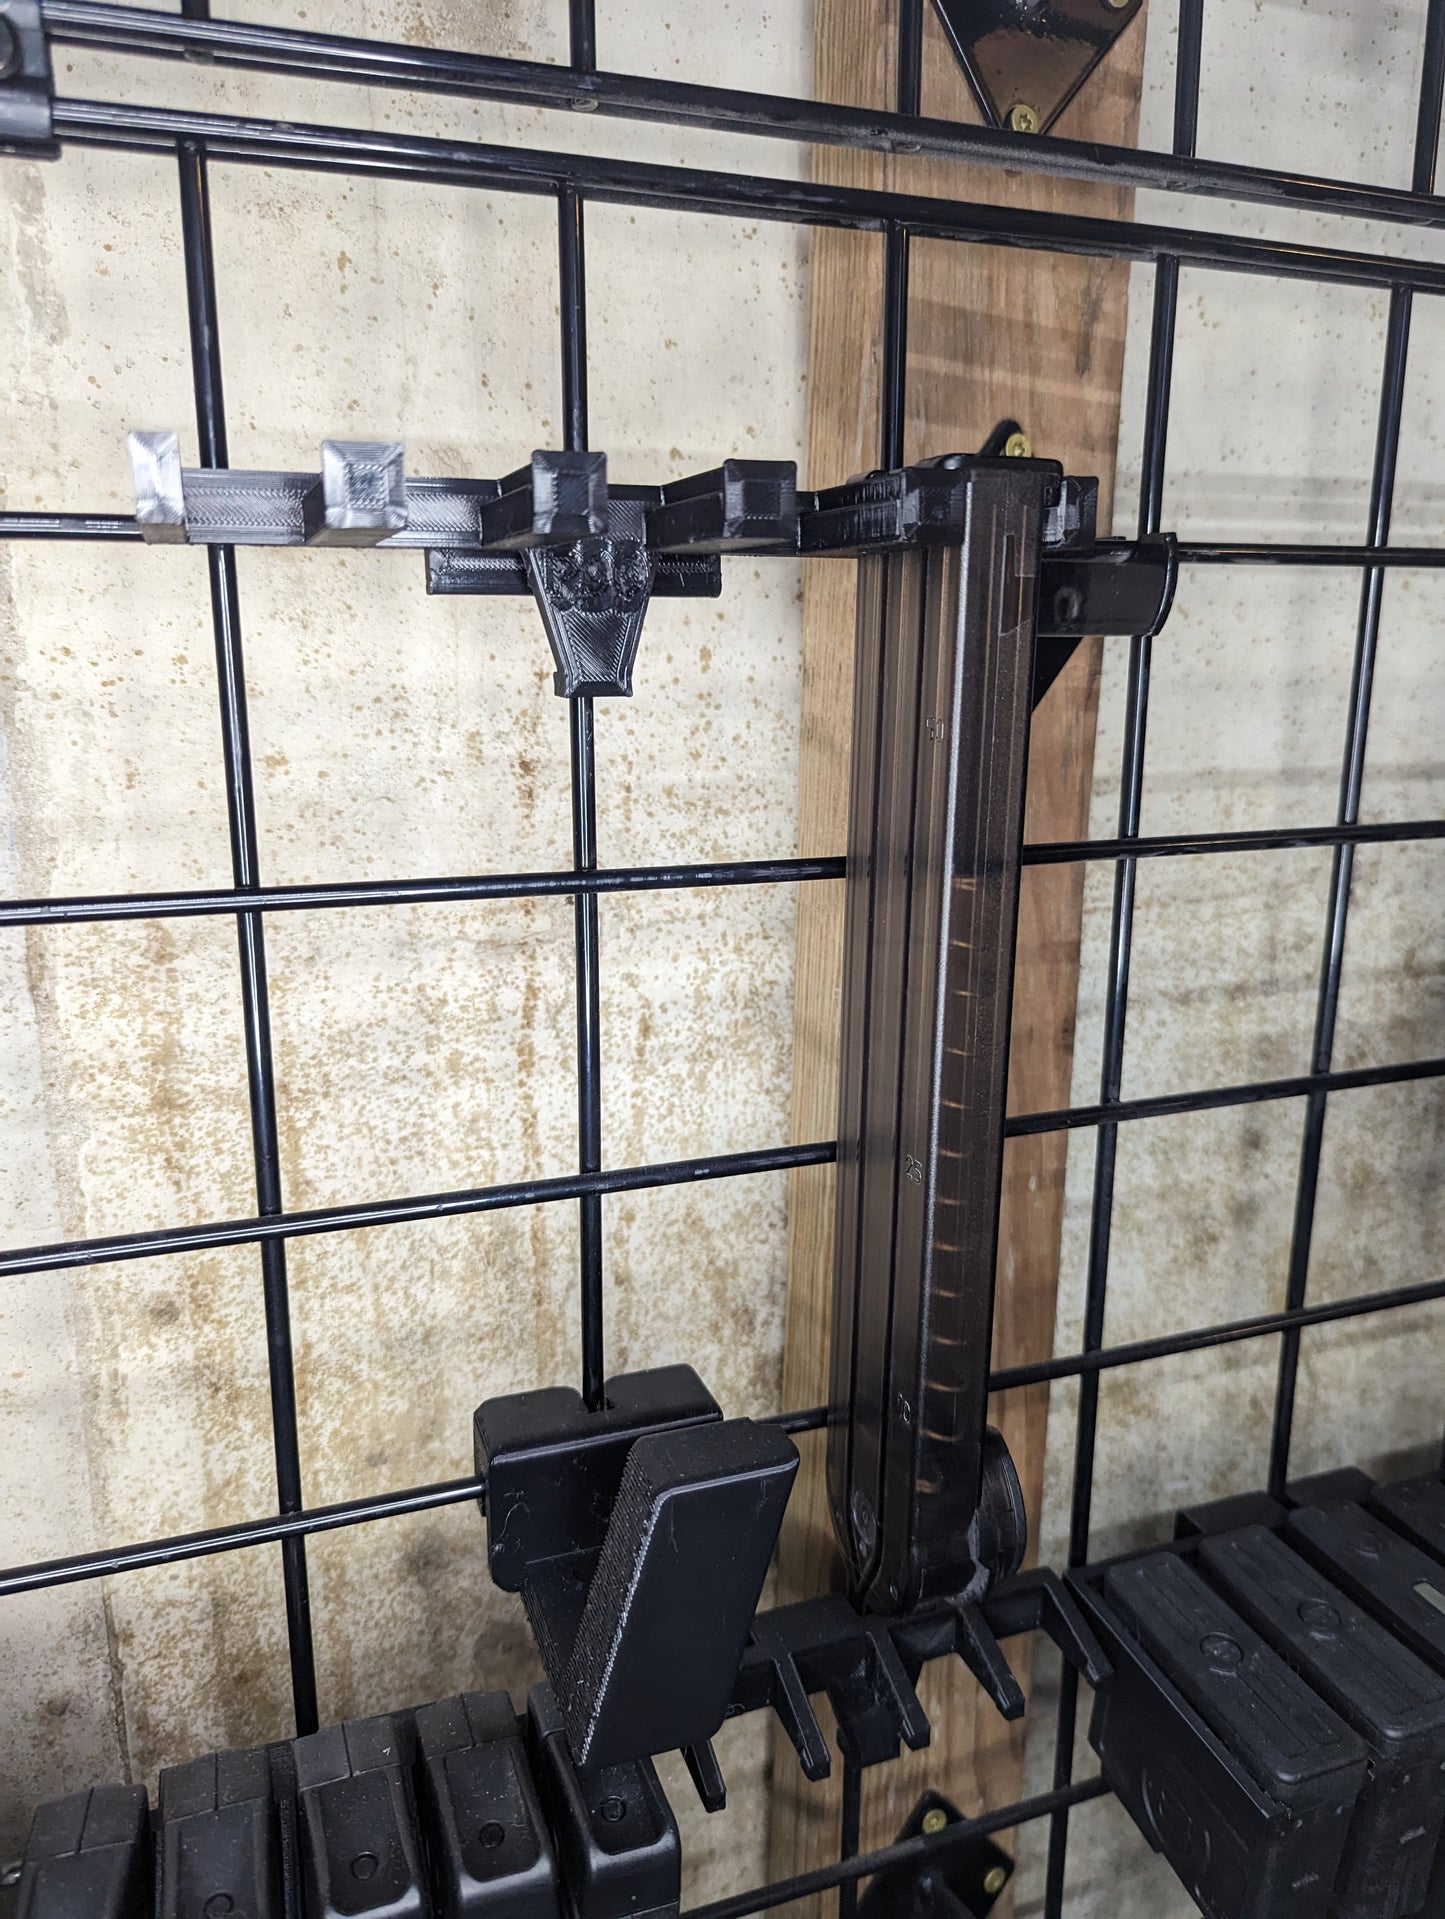 Mount for FN P90/PS90 Mags - Gridwall | Magazine Holder Storage Rack